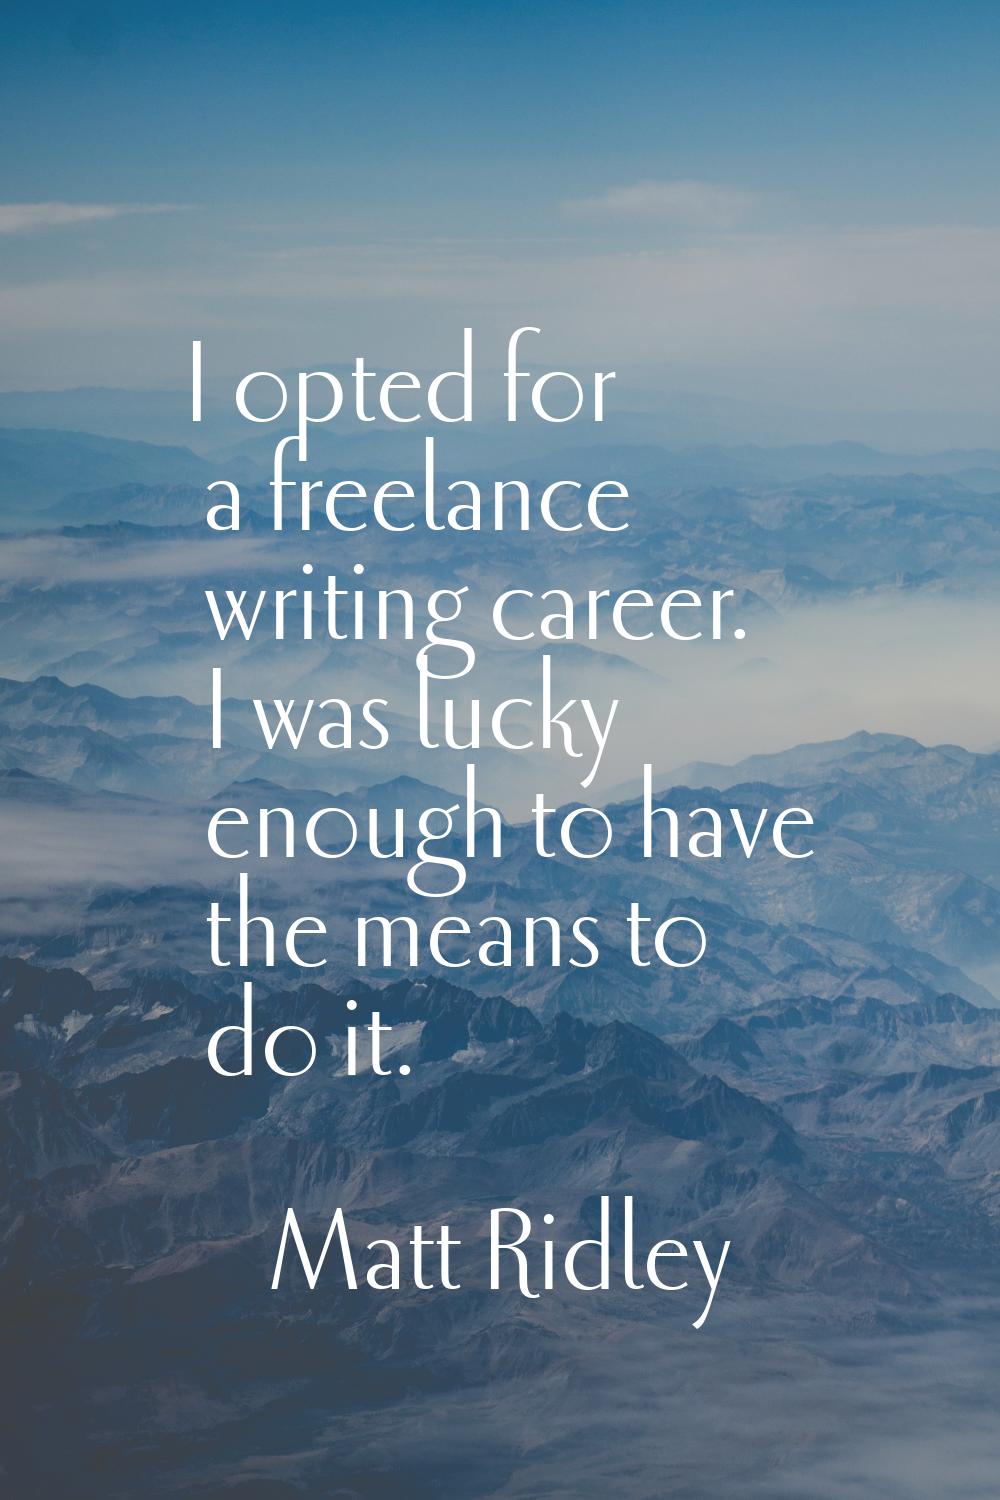 I opted for a freelance writing career. I was lucky enough to have the means to do it.